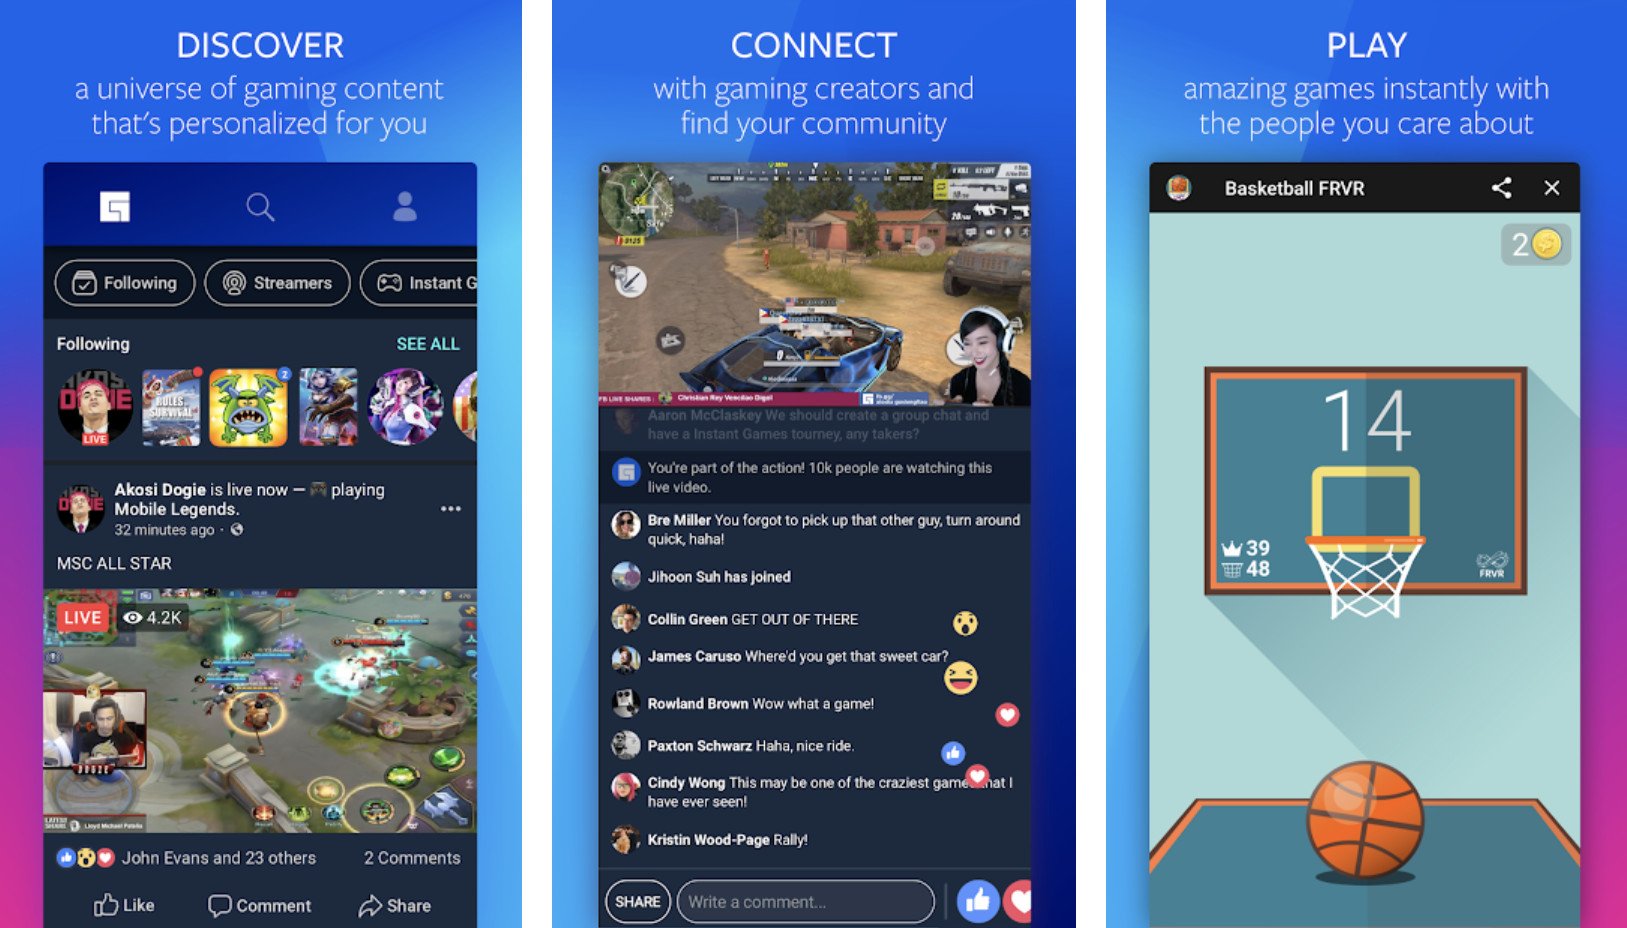 https://www.windowscentral.com/sites/wpcentral.com/files/styles/larger/public/field/image/2020/08/facebook-gaming-app-features.jpg